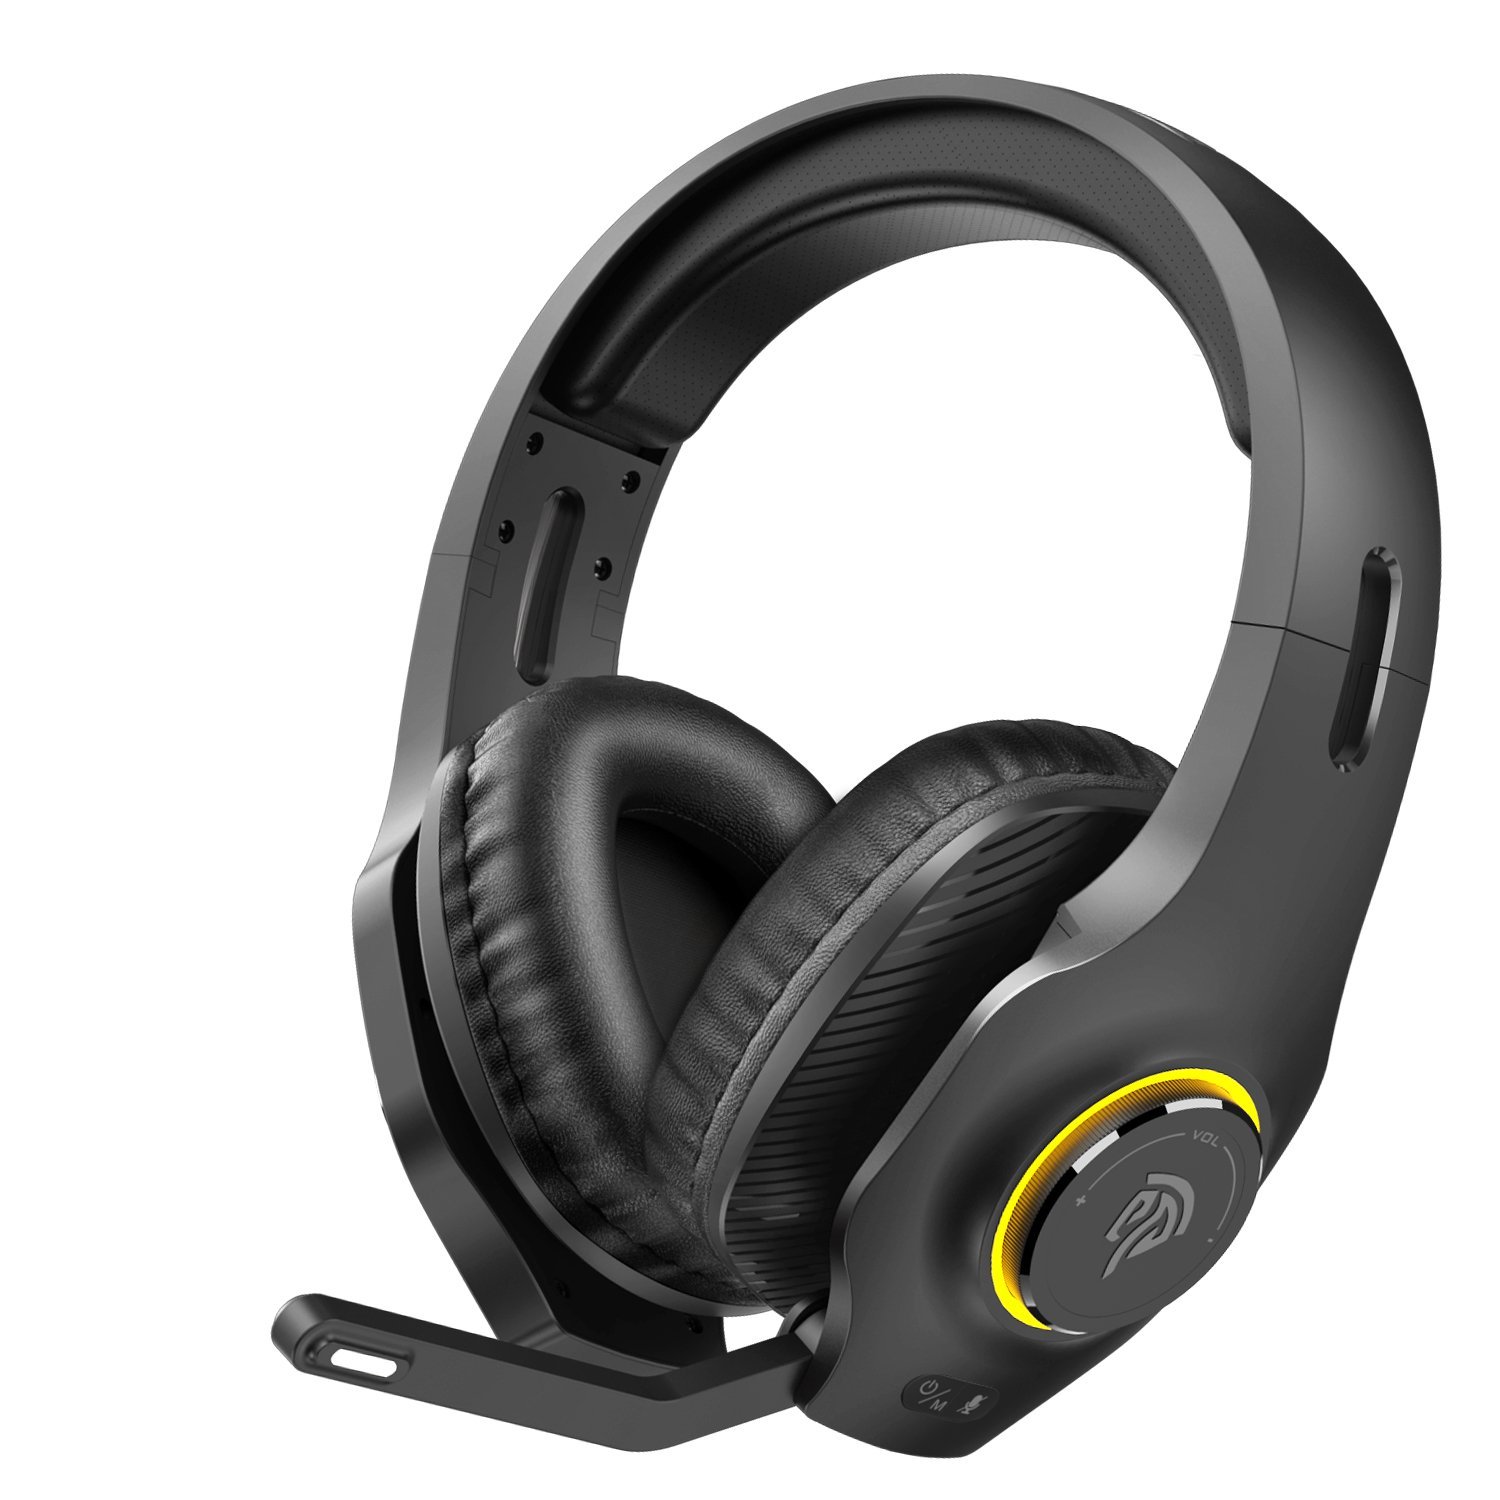 Easysmx Vip002w Wireless Gaming Headset Product